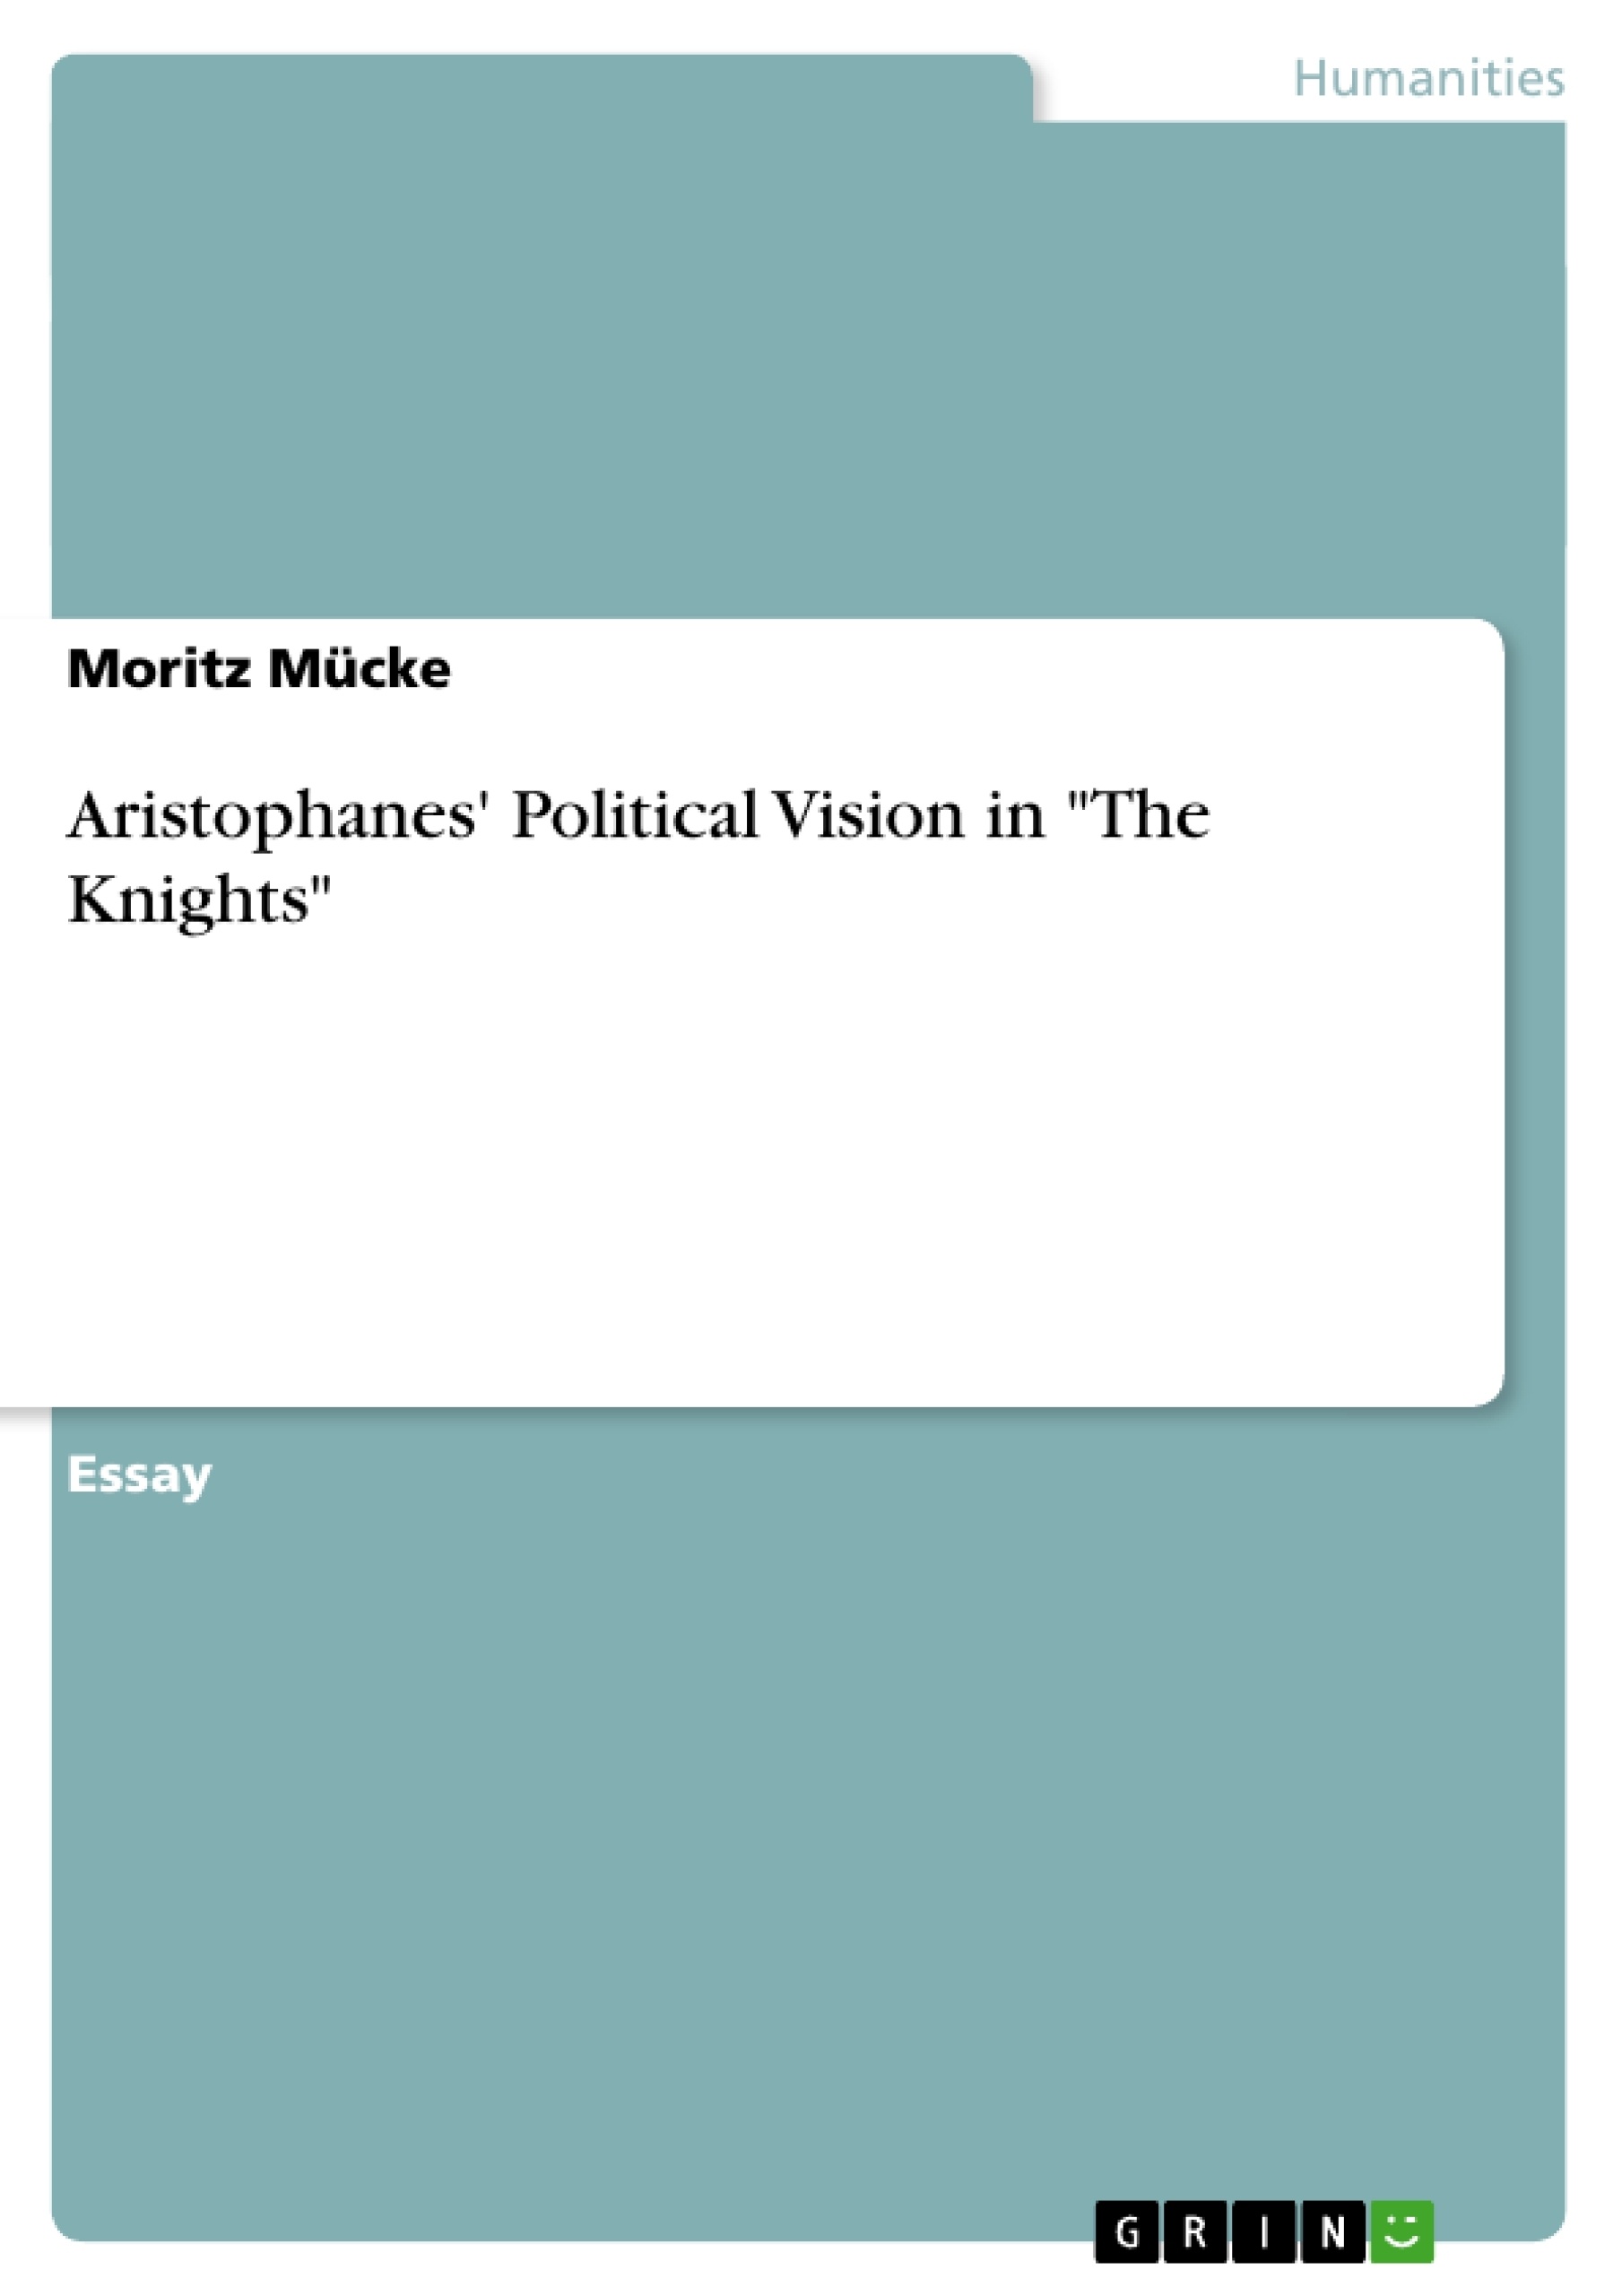 Title: Aristophanes' Political Vision in "The Knights"